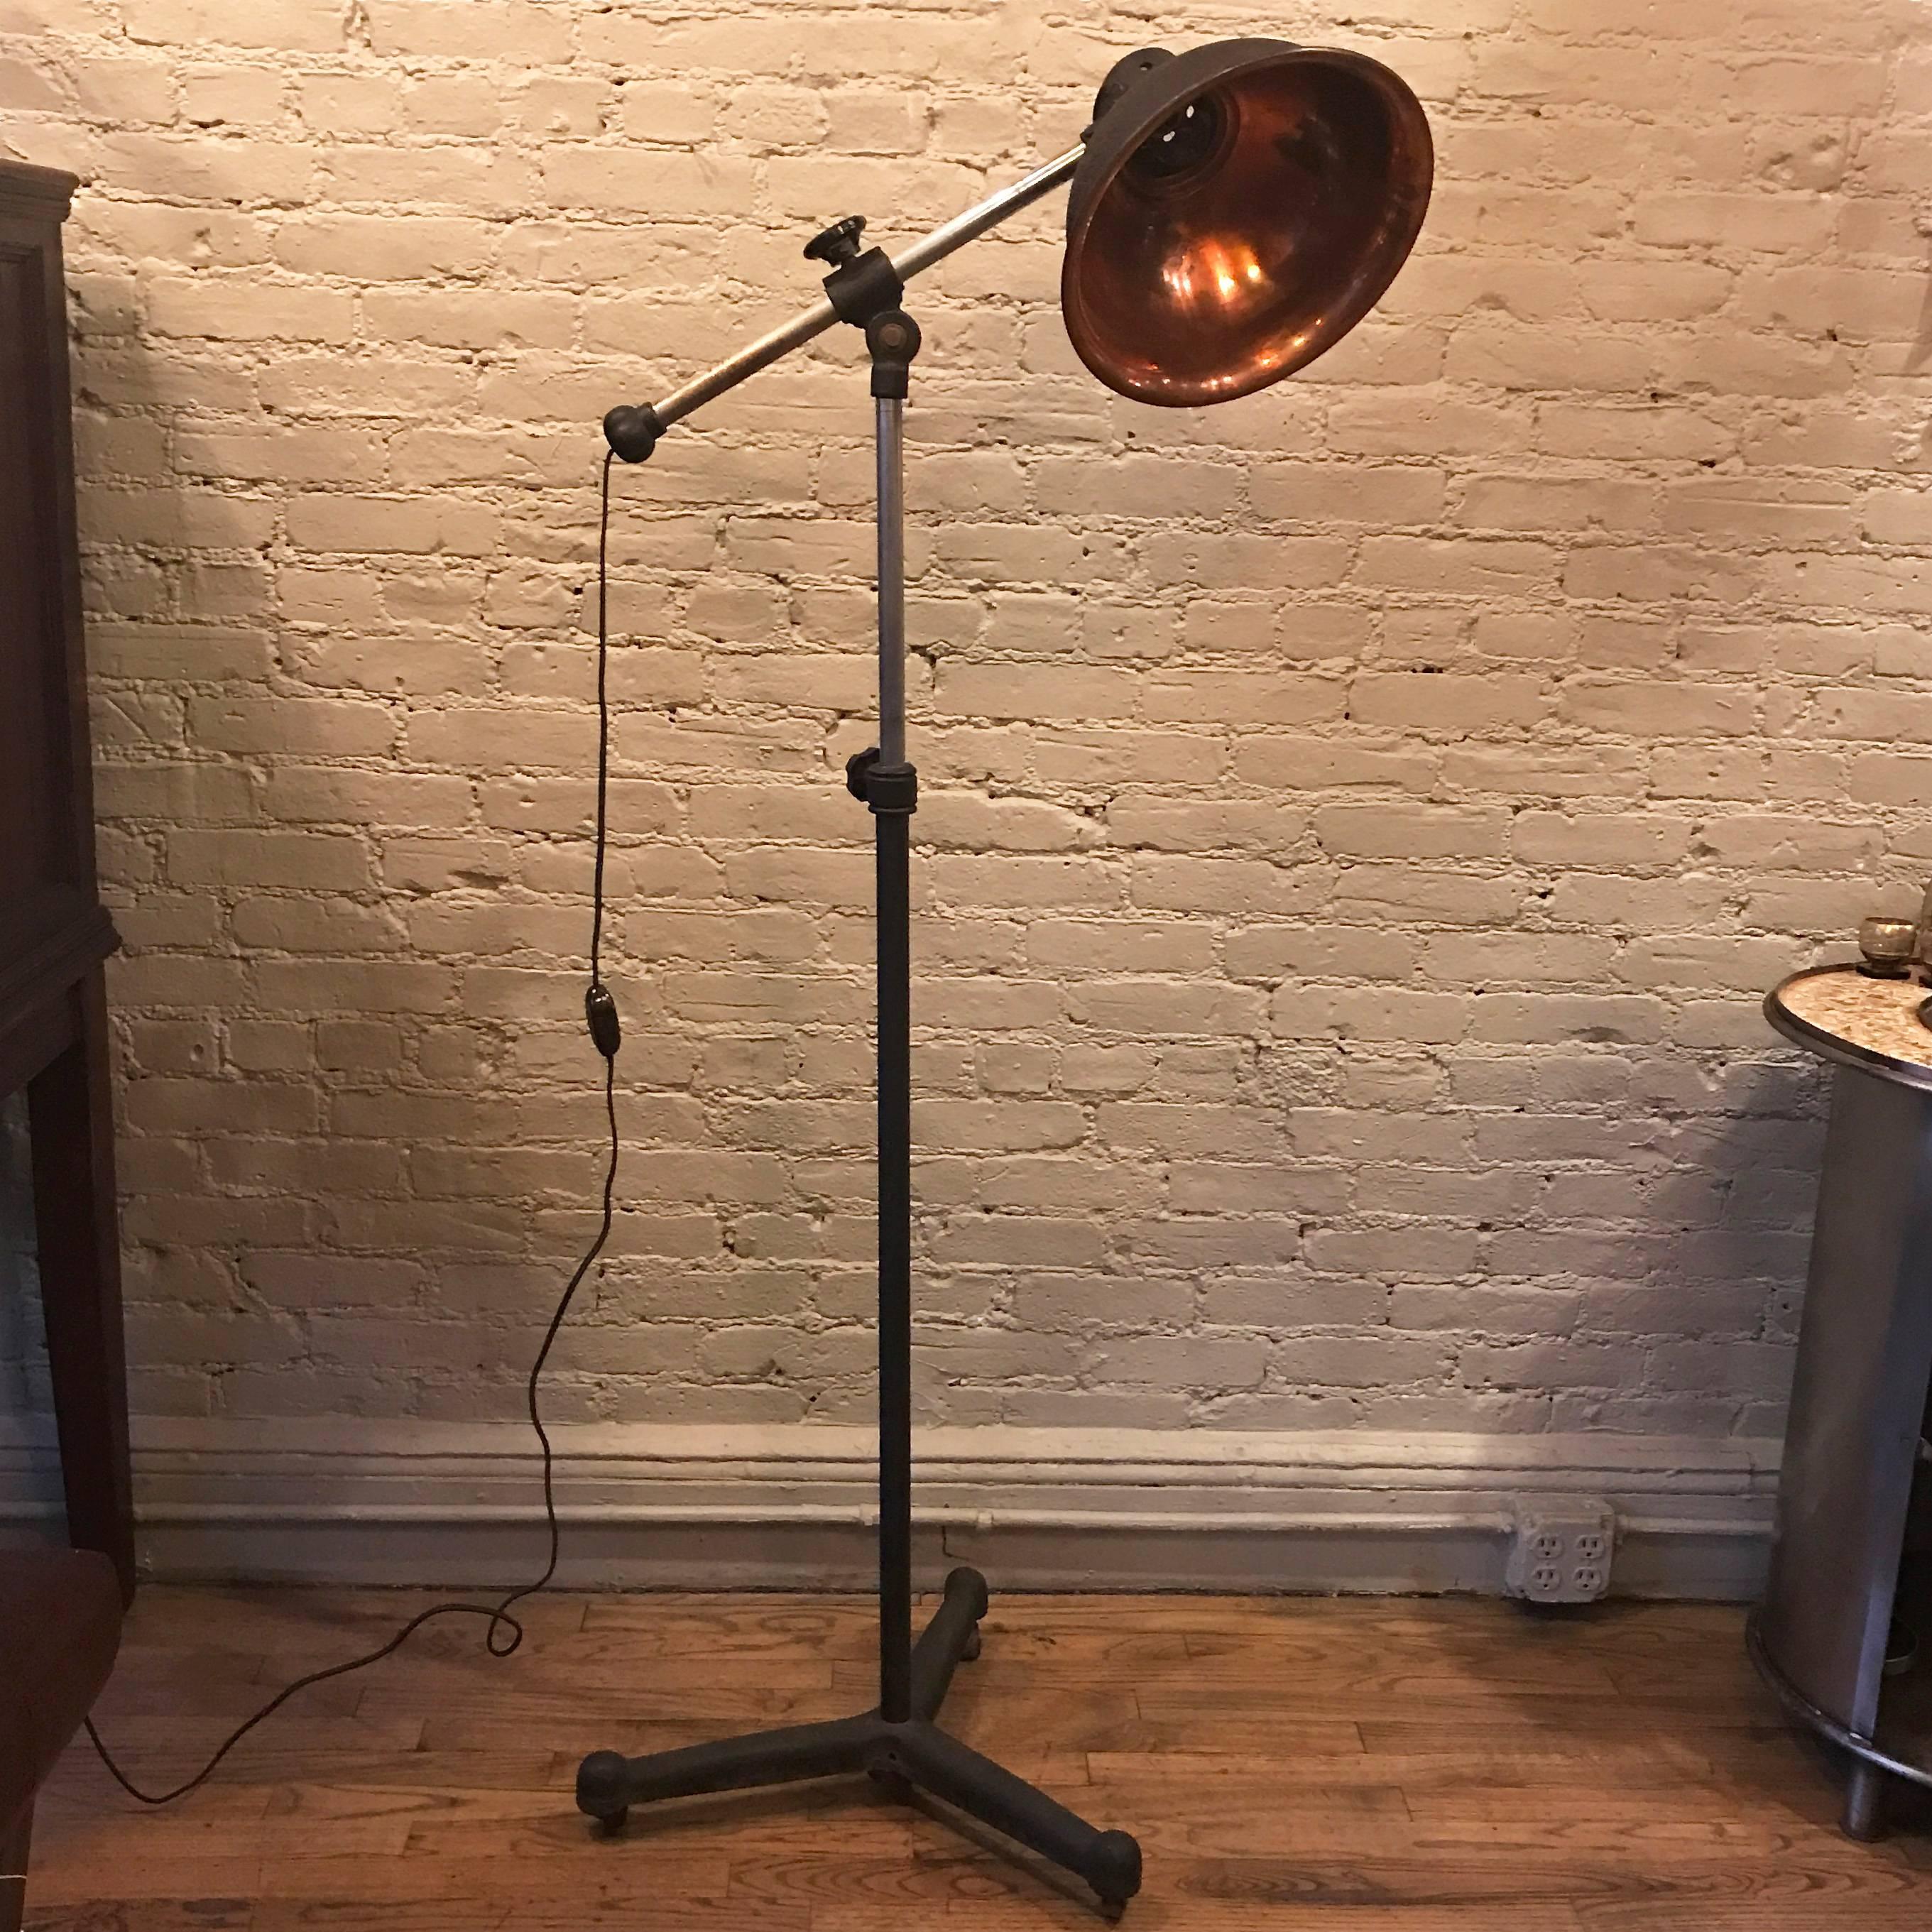 Industrial, medical, heat lamp, floor lamp features a rolling cast iron base, steel construction and cast aluminum shade with copper plated interior. The lamp is newly wired and accepts a medium socket bulb up to 300 watts.